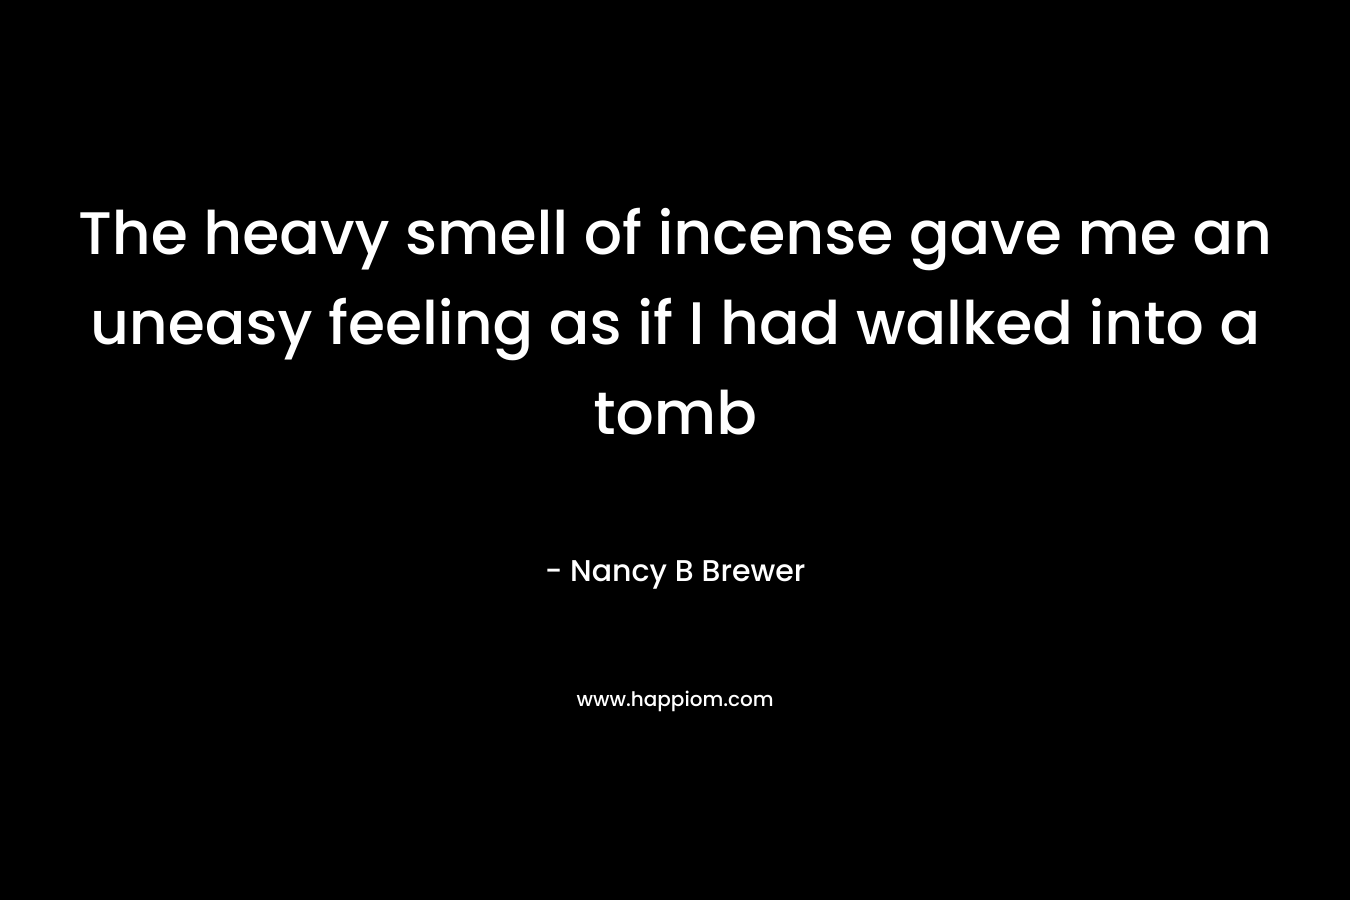 The heavy smell of incense gave me an uneasy feeling as if I had walked into a tomb – Nancy B Brewer